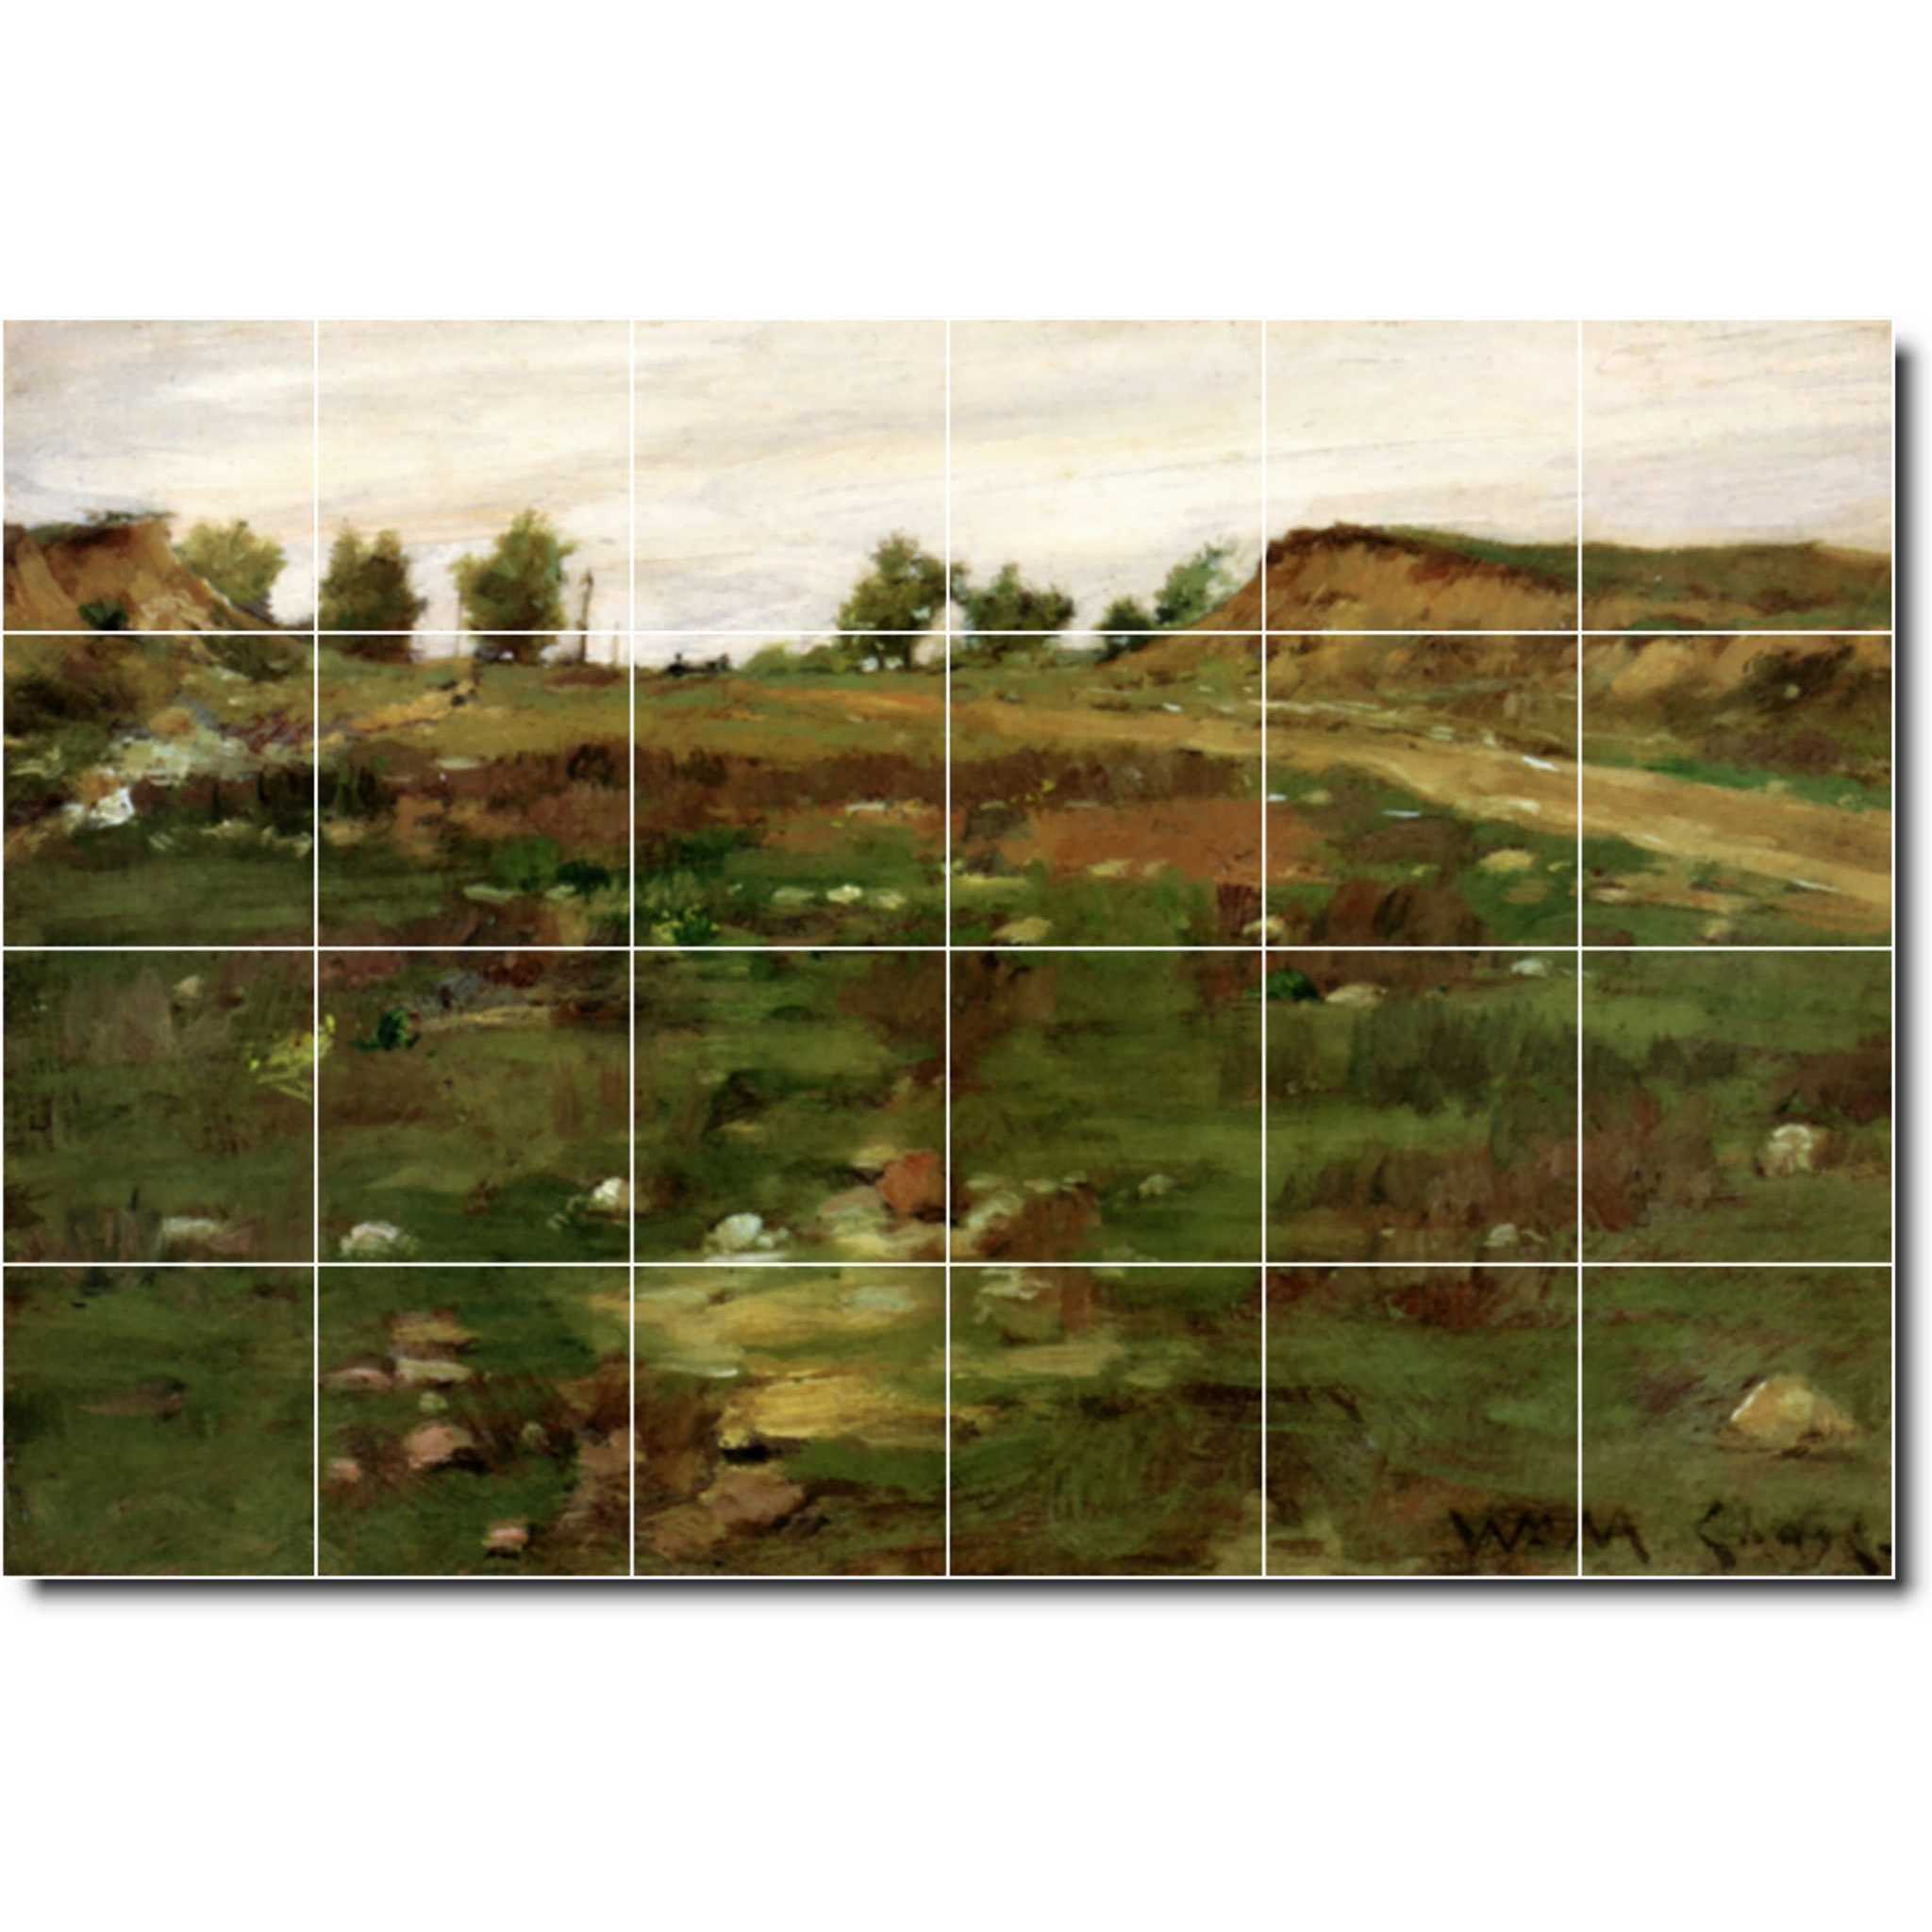 william chase country painting ceramic tile mural p01625